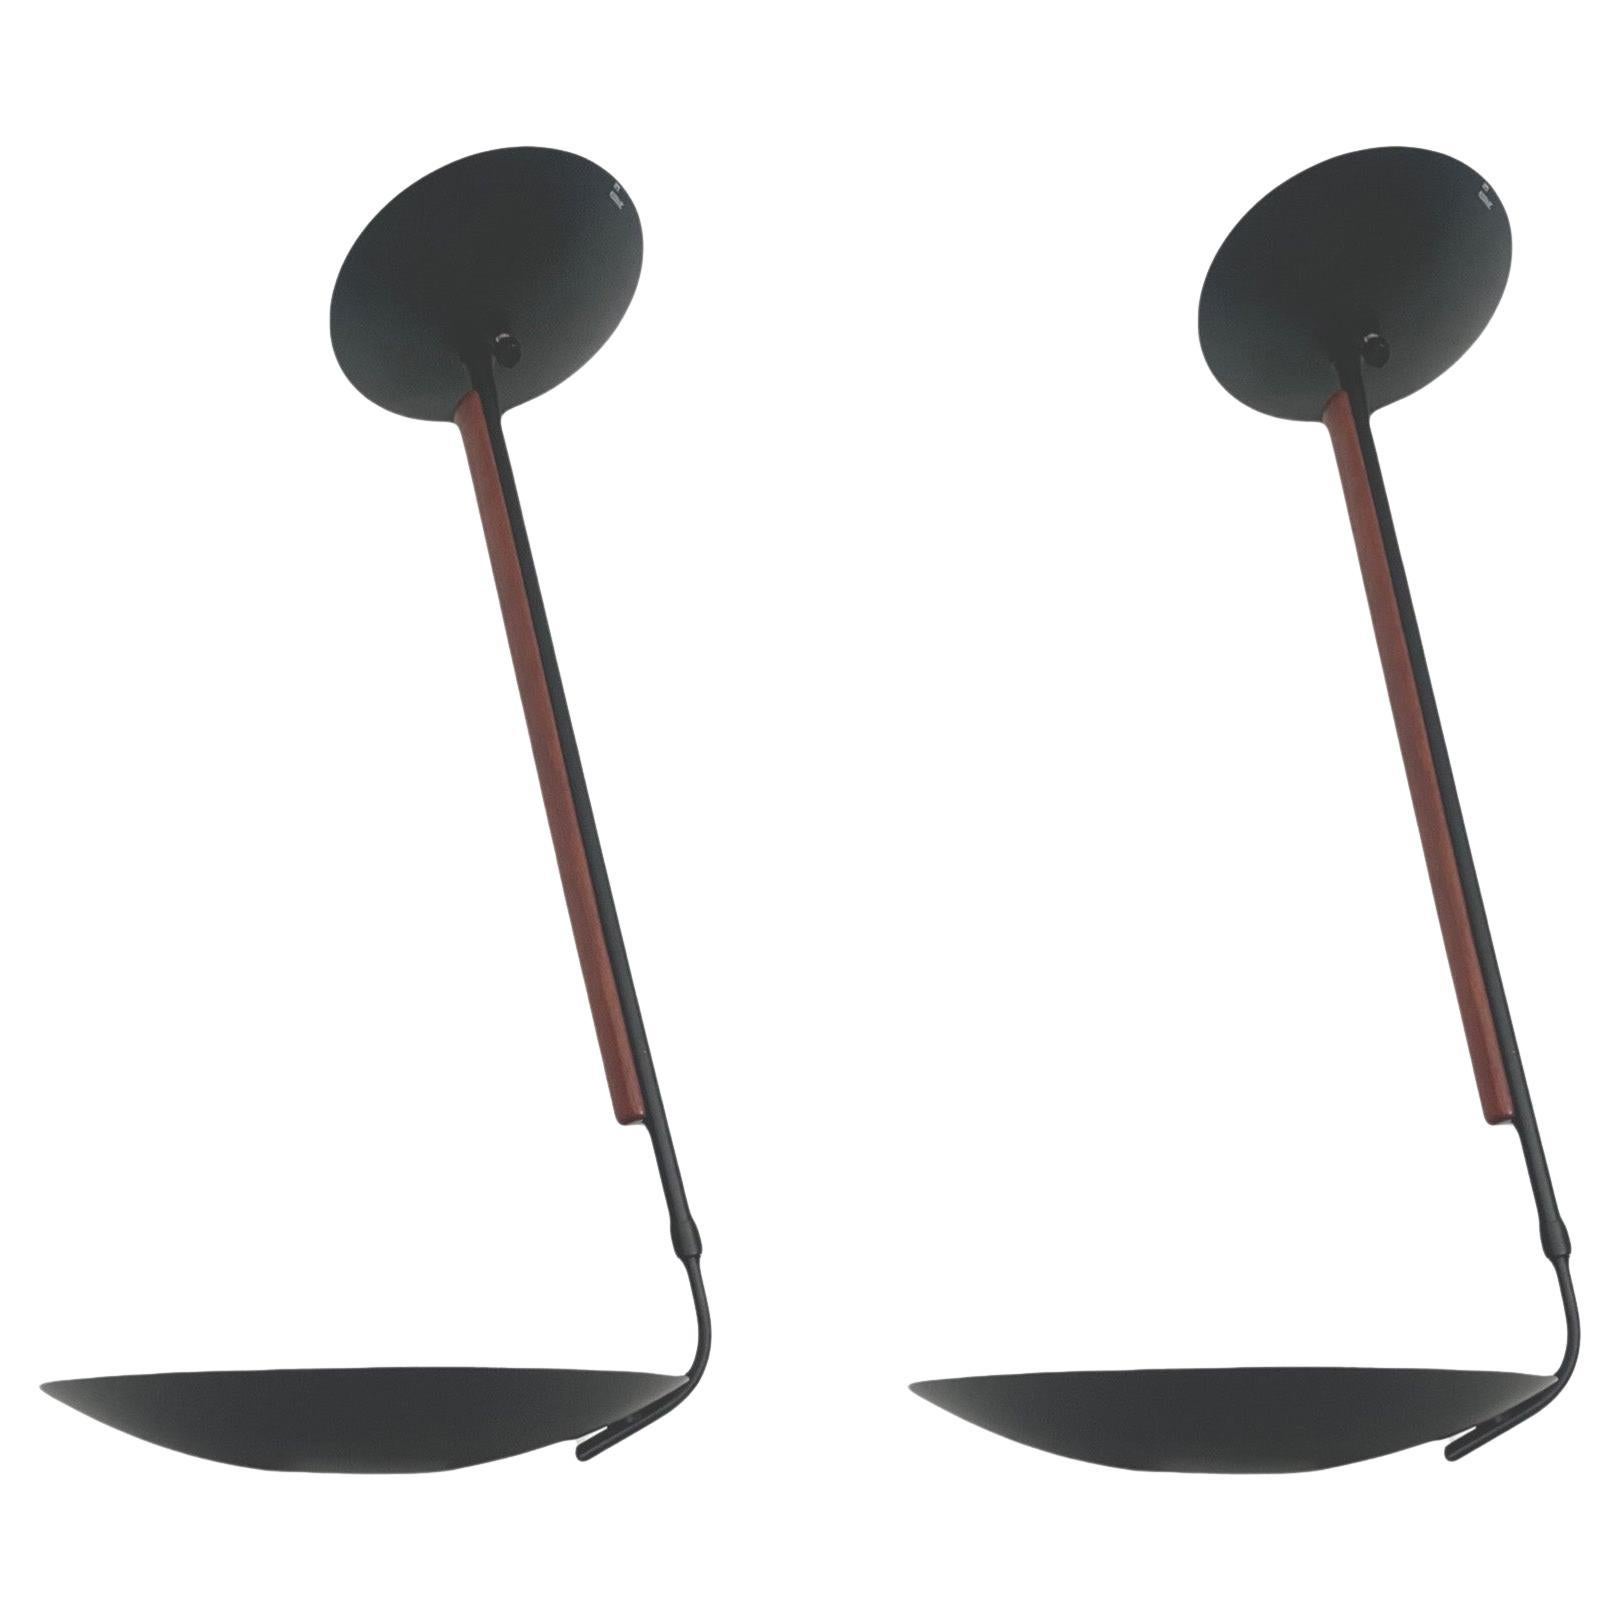 Cool Postmodern Pair of Chandeliers/Flushmounts by Leonardo Marelli for Estiluz. Model: T-1166 Negro. These fixtures were manufactured in Barcelona (Spain) during 1980s.
The condition is excellent, they have NO use. “Estiluz” original sticker label